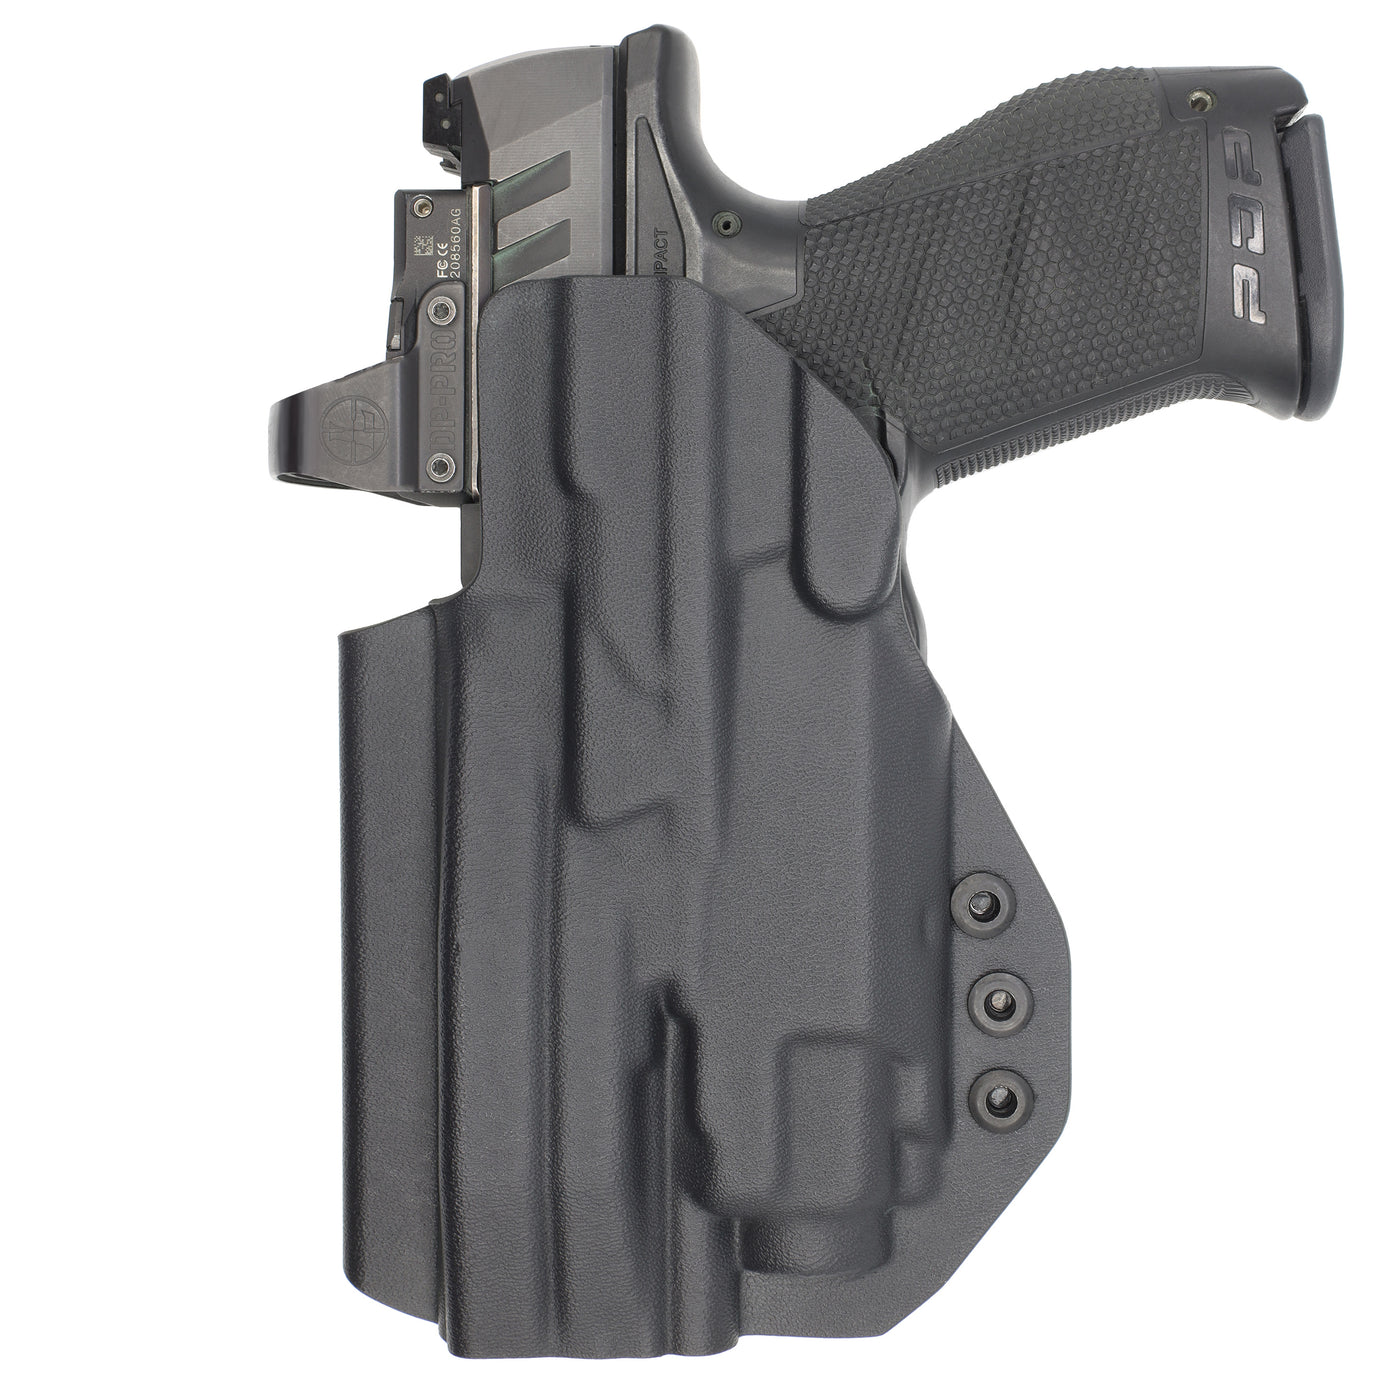 C&G Holsters custom IWB Tactical Beretta streamlight TLR8 holstered back view